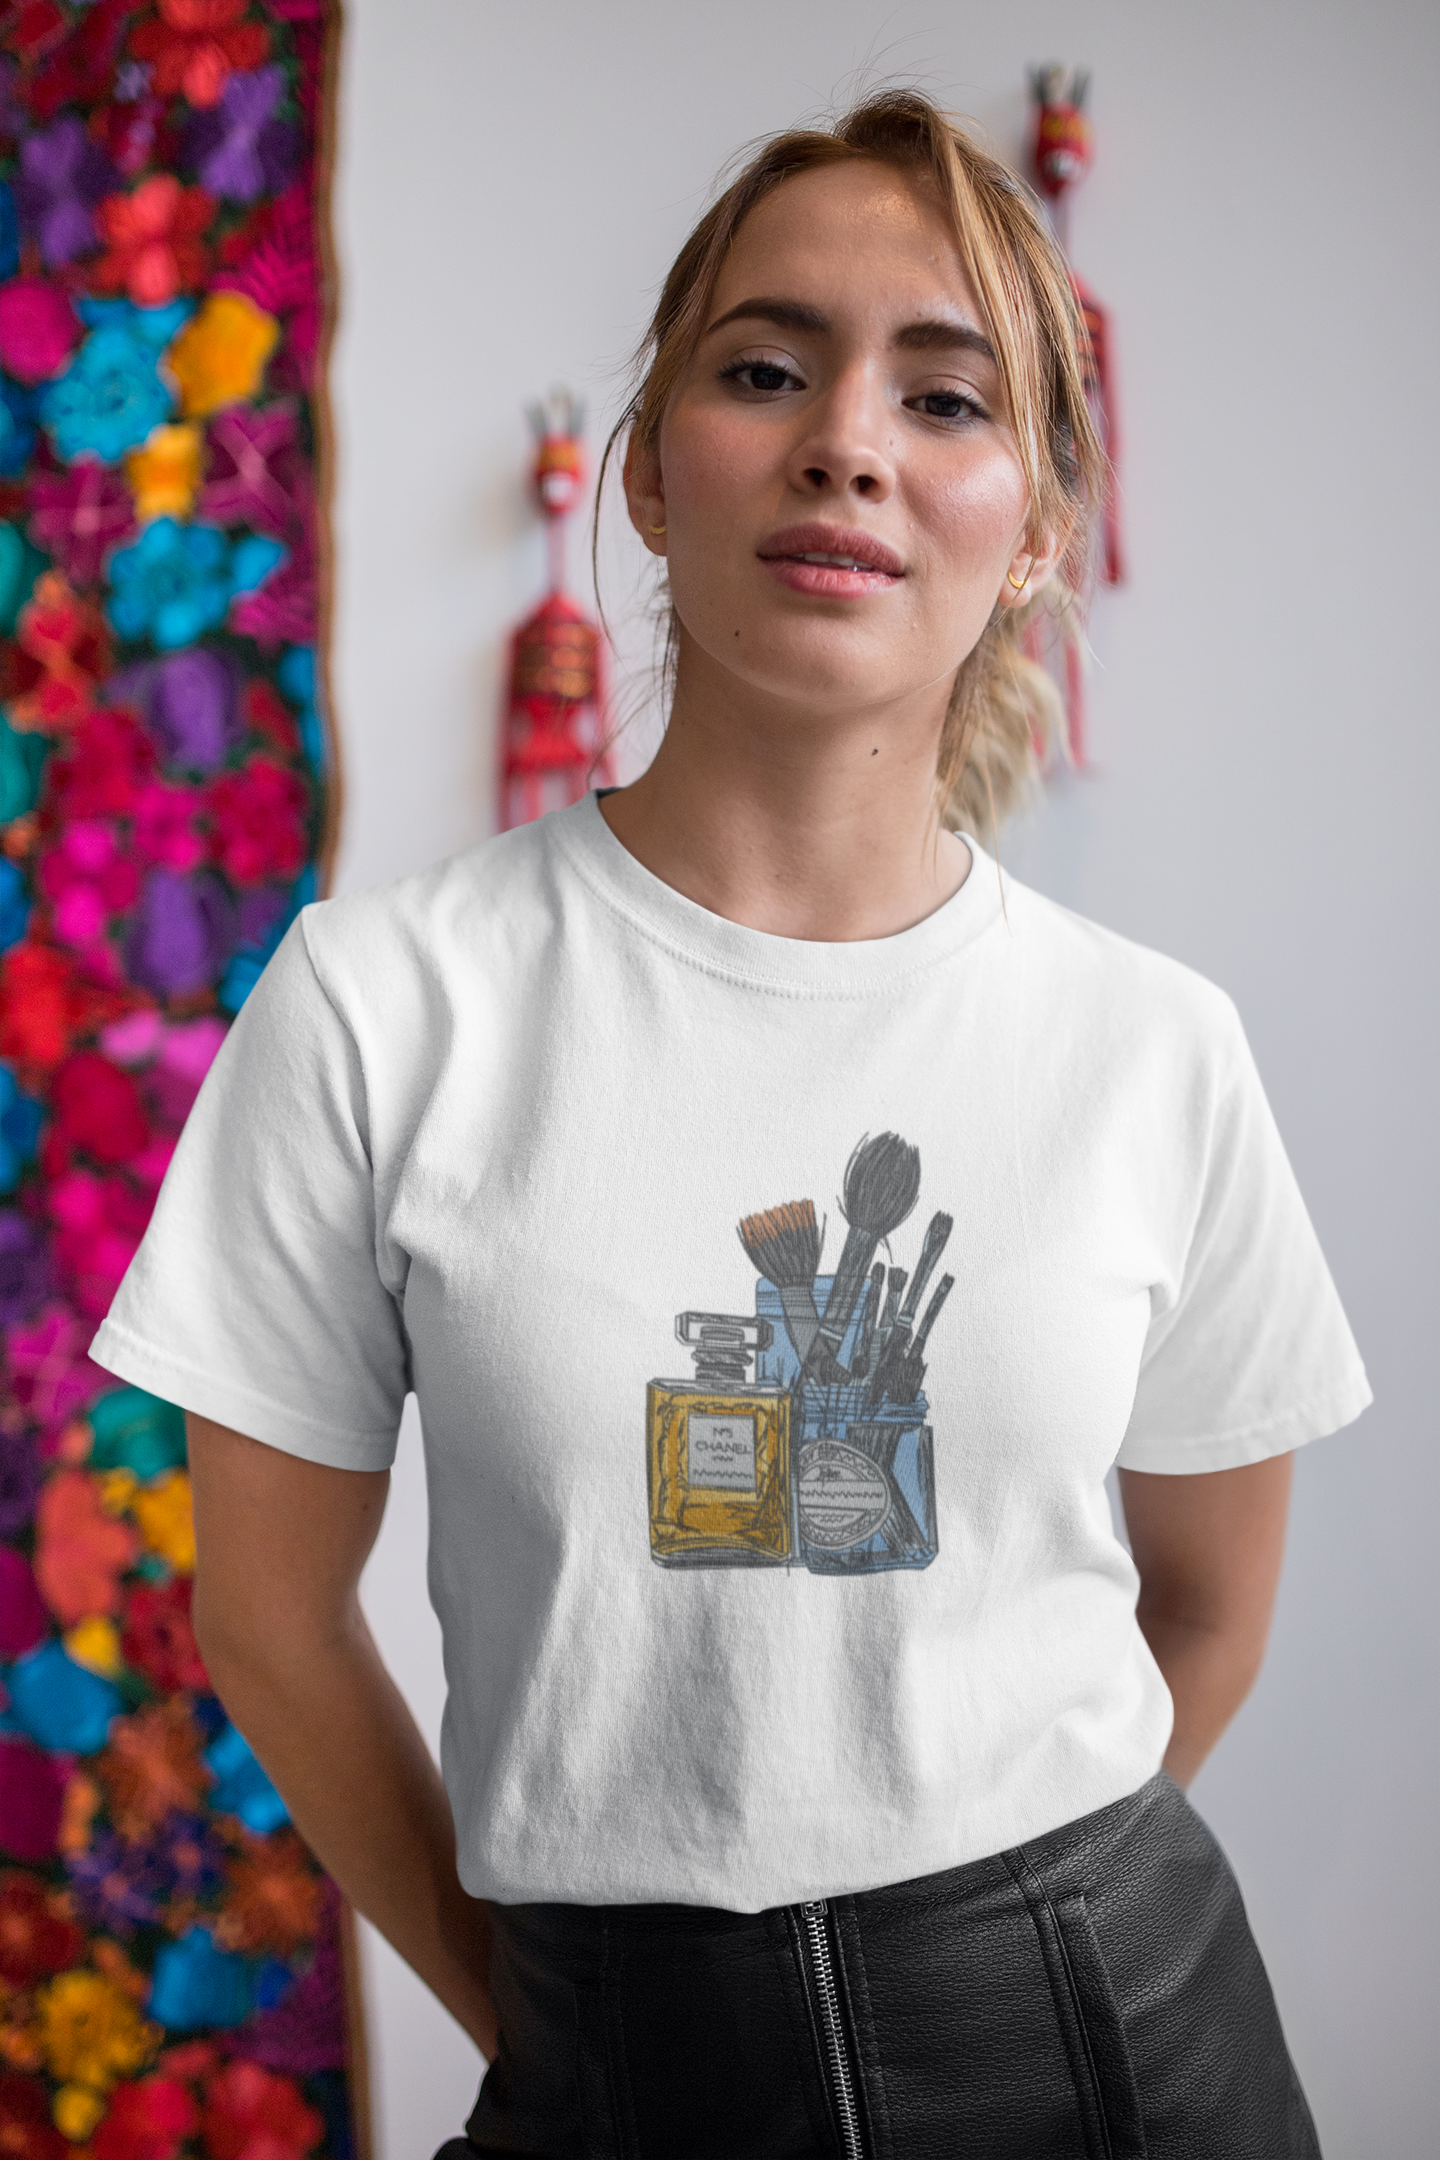 Embroidered t-shirt with Make up set design